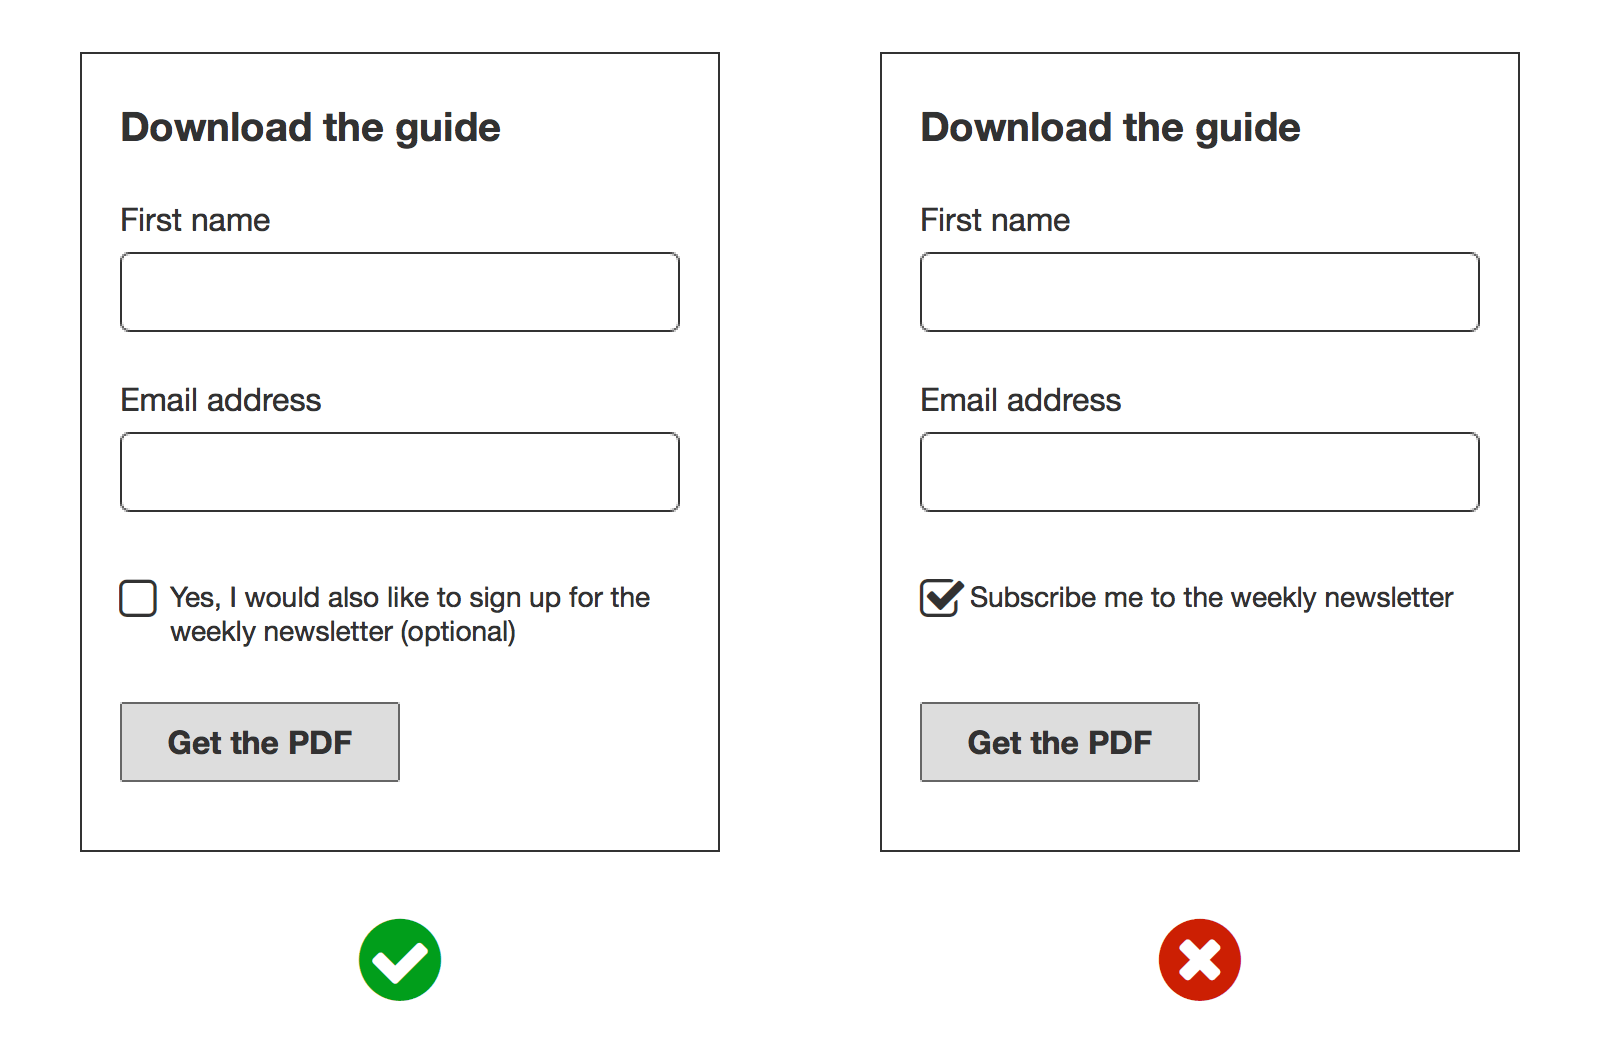 Image shows two forms. One leaves an opt-in box unchecked until a user chooses to select it. This is the correct way to handle an opt-in.